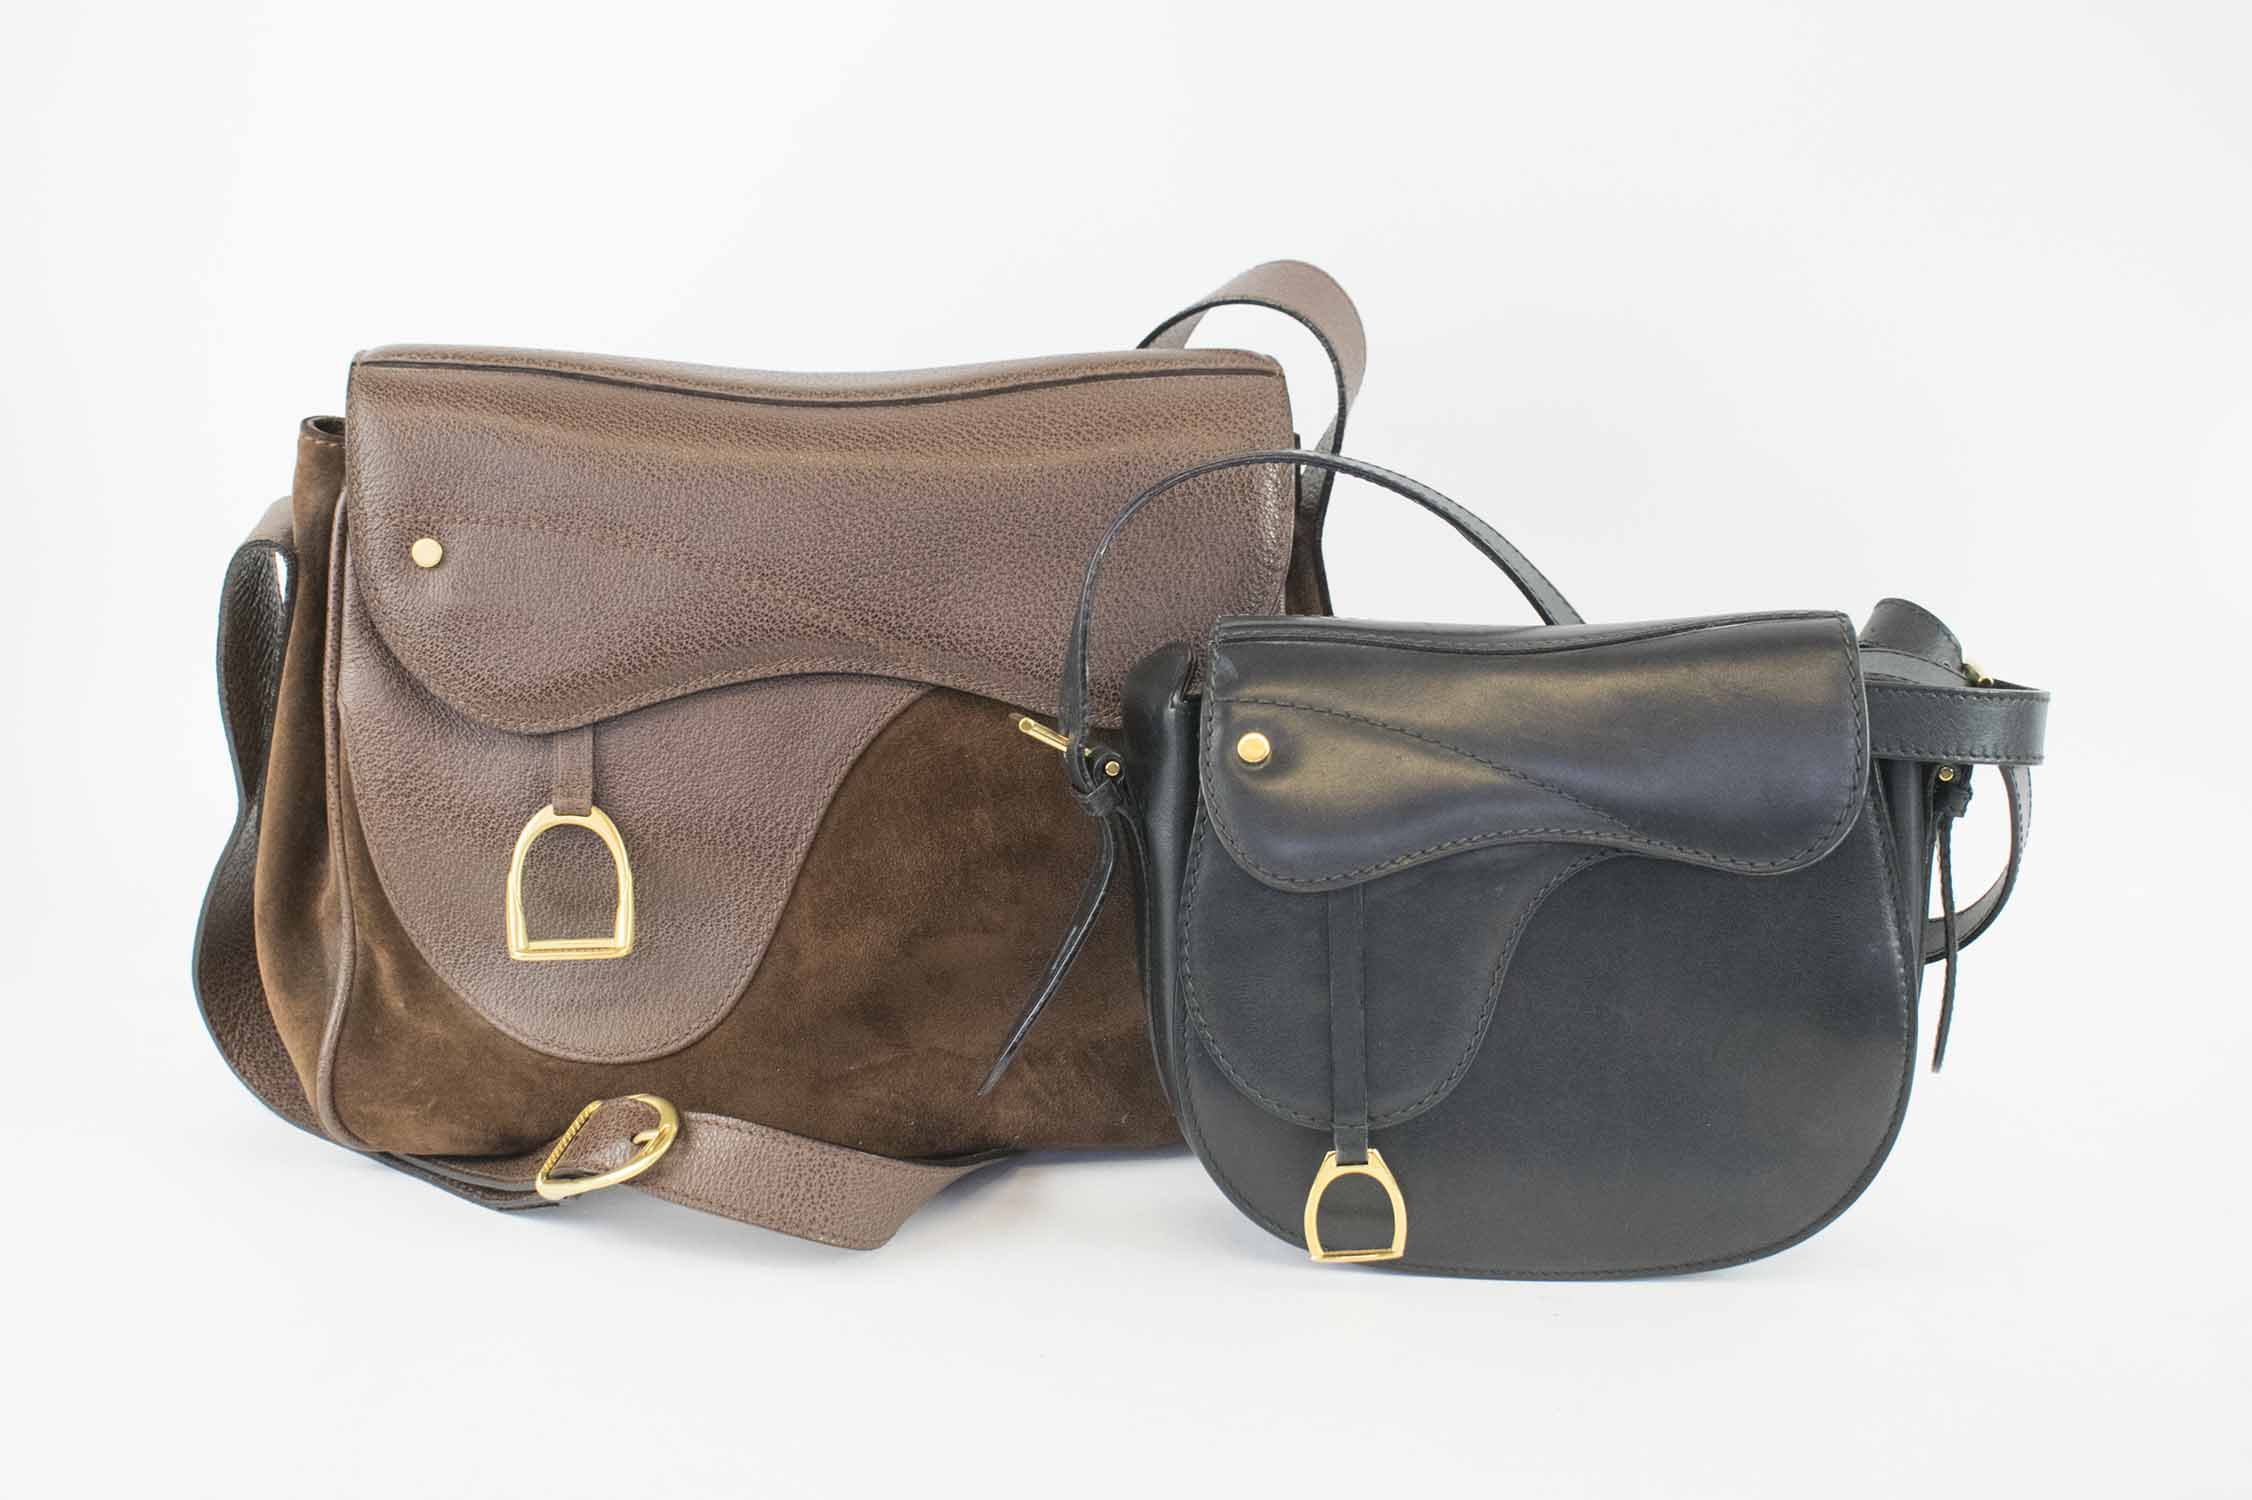 GUCCI VINTAGE SADDLE BAGS, with equestrian stirrup charm, one brown leather  and suede 30cm x 23cm H x 12cm, the other black leather 20cm x 18cm H x 6cm  both with adjustable